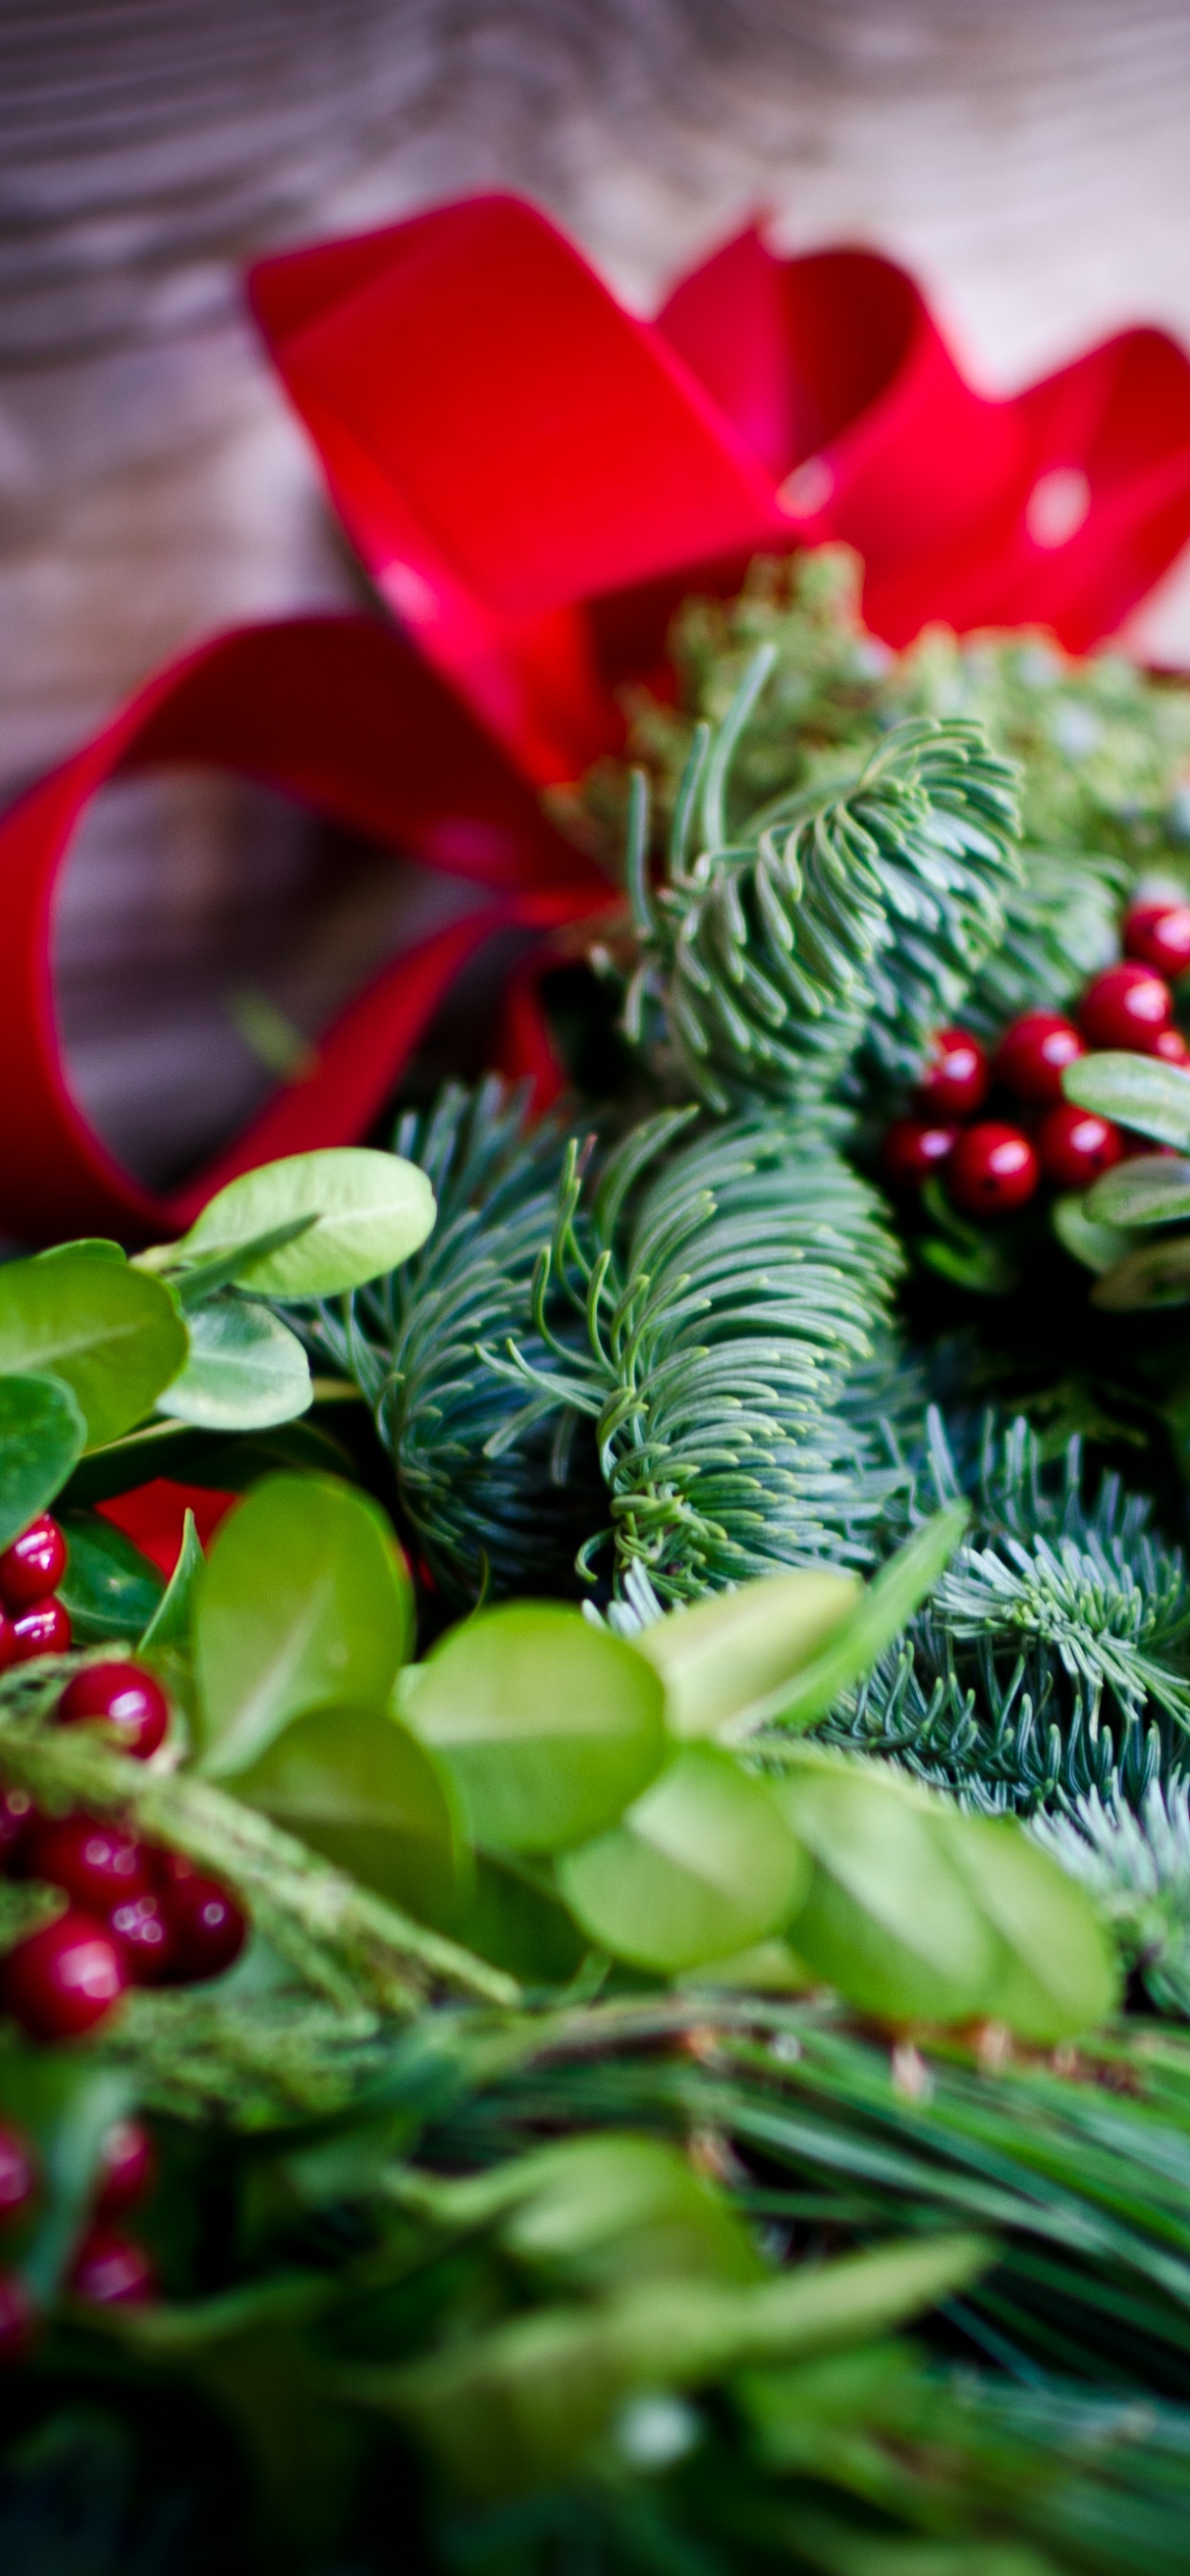 Christmas Decoration, Christmas Day, Christmas Ornament, Plant, Leaf. Wallpaper in 1242x2688 Resolution